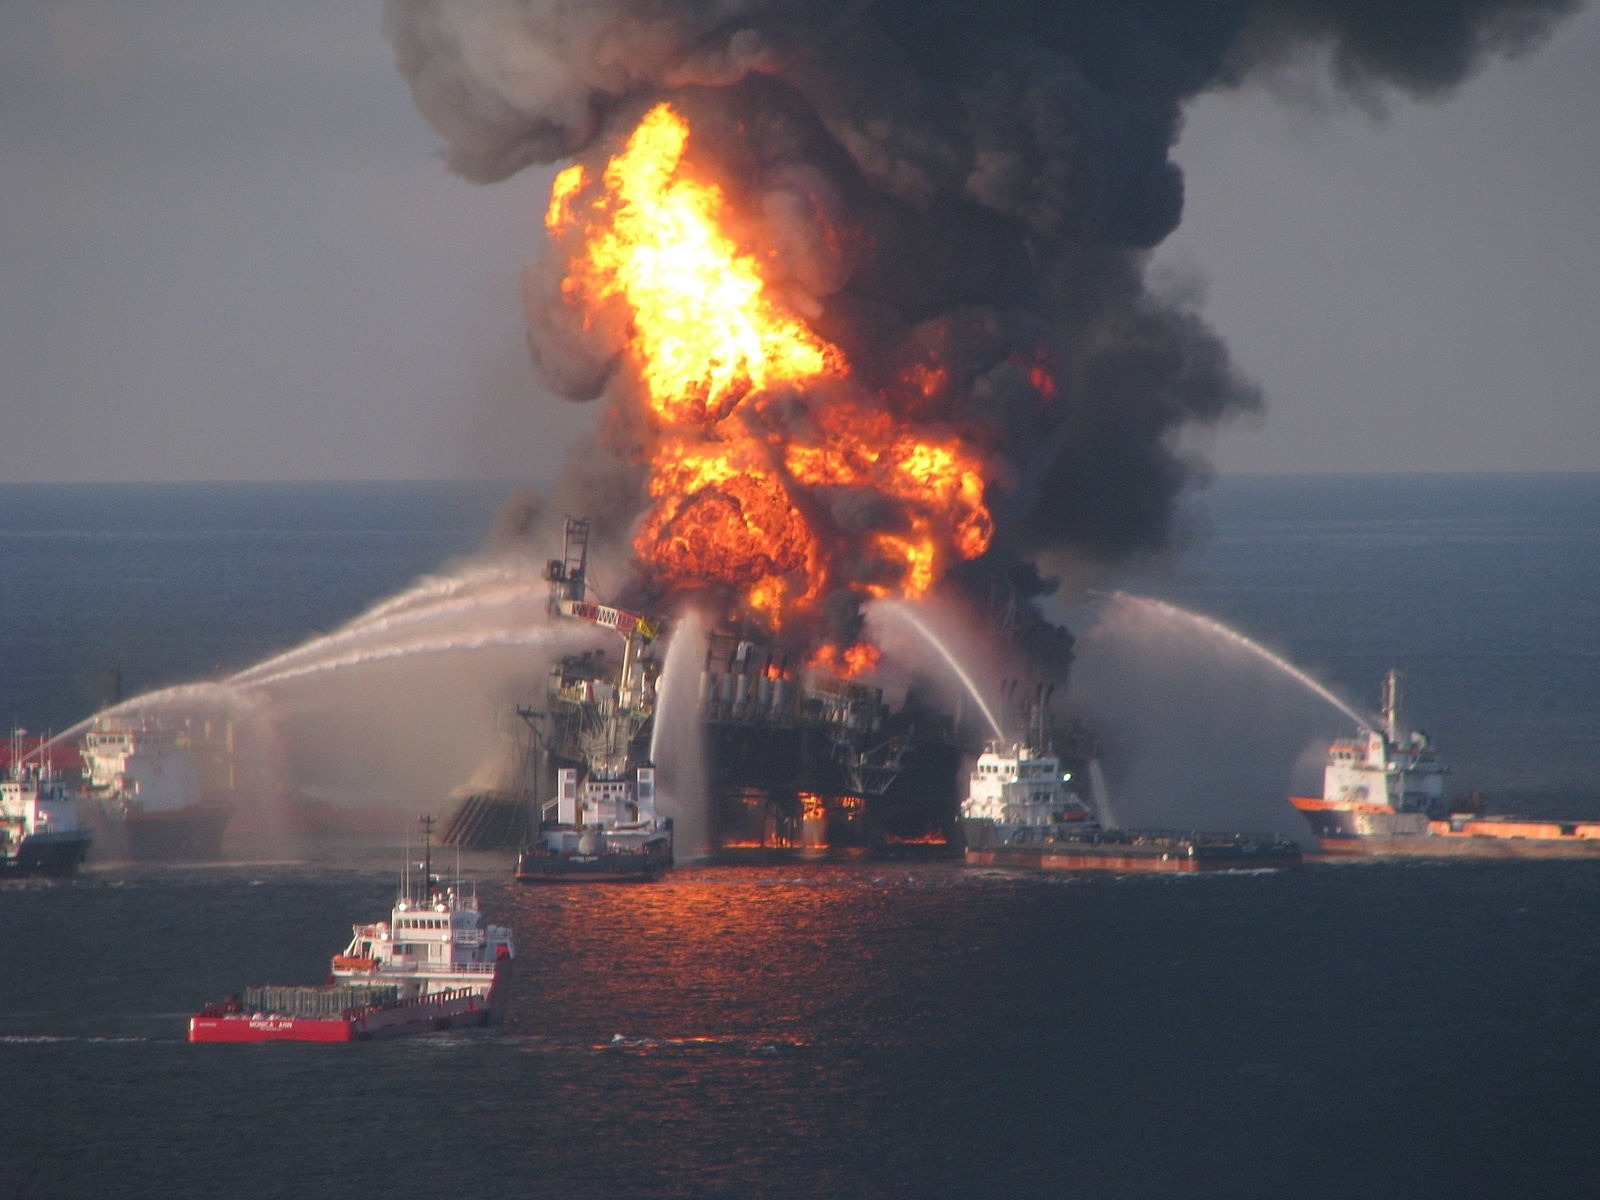 BP's Deepwater Horizon drilling platform disaster which started on April 10, 2010 and leaked  3.19 million barrels of oil into the Gulf of Mexico across 87 days,  caused $62 billion in damages and clean-up costs. It is by far the worst oil spill in U.S. history. Photo courtesy NOAA